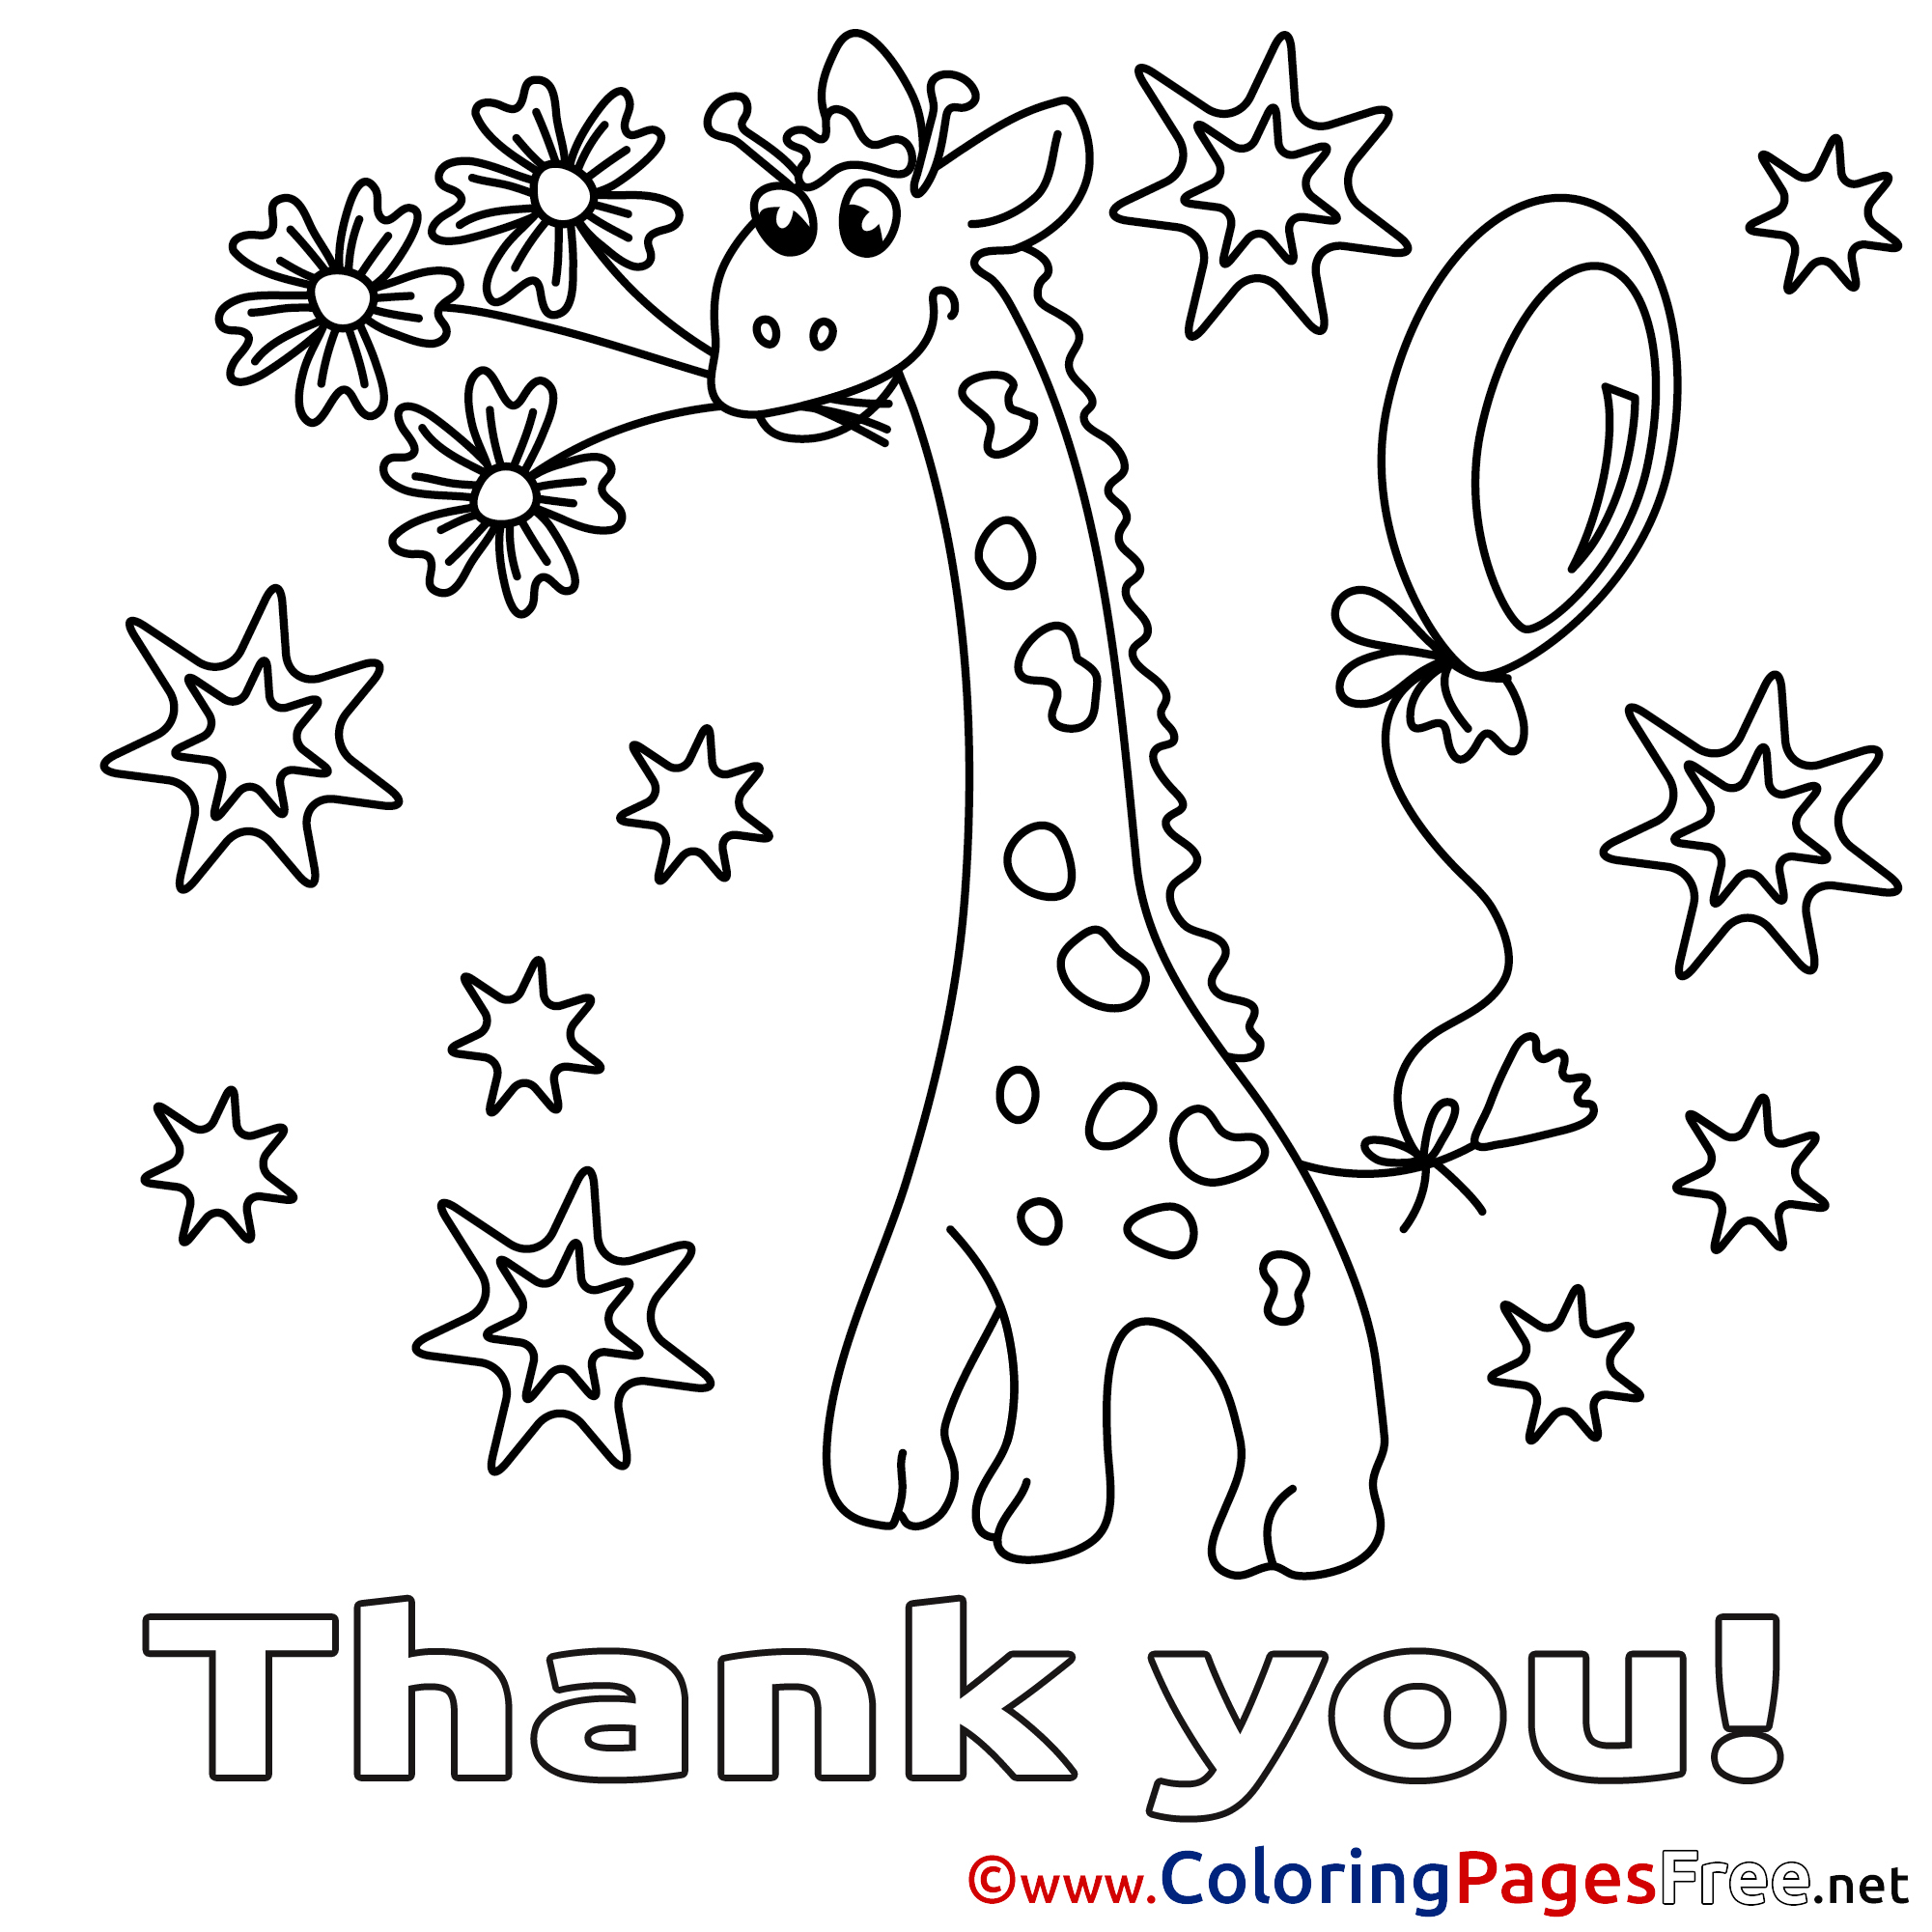 Thank You Coloring Pages Free at Free printable colorings pages to print and